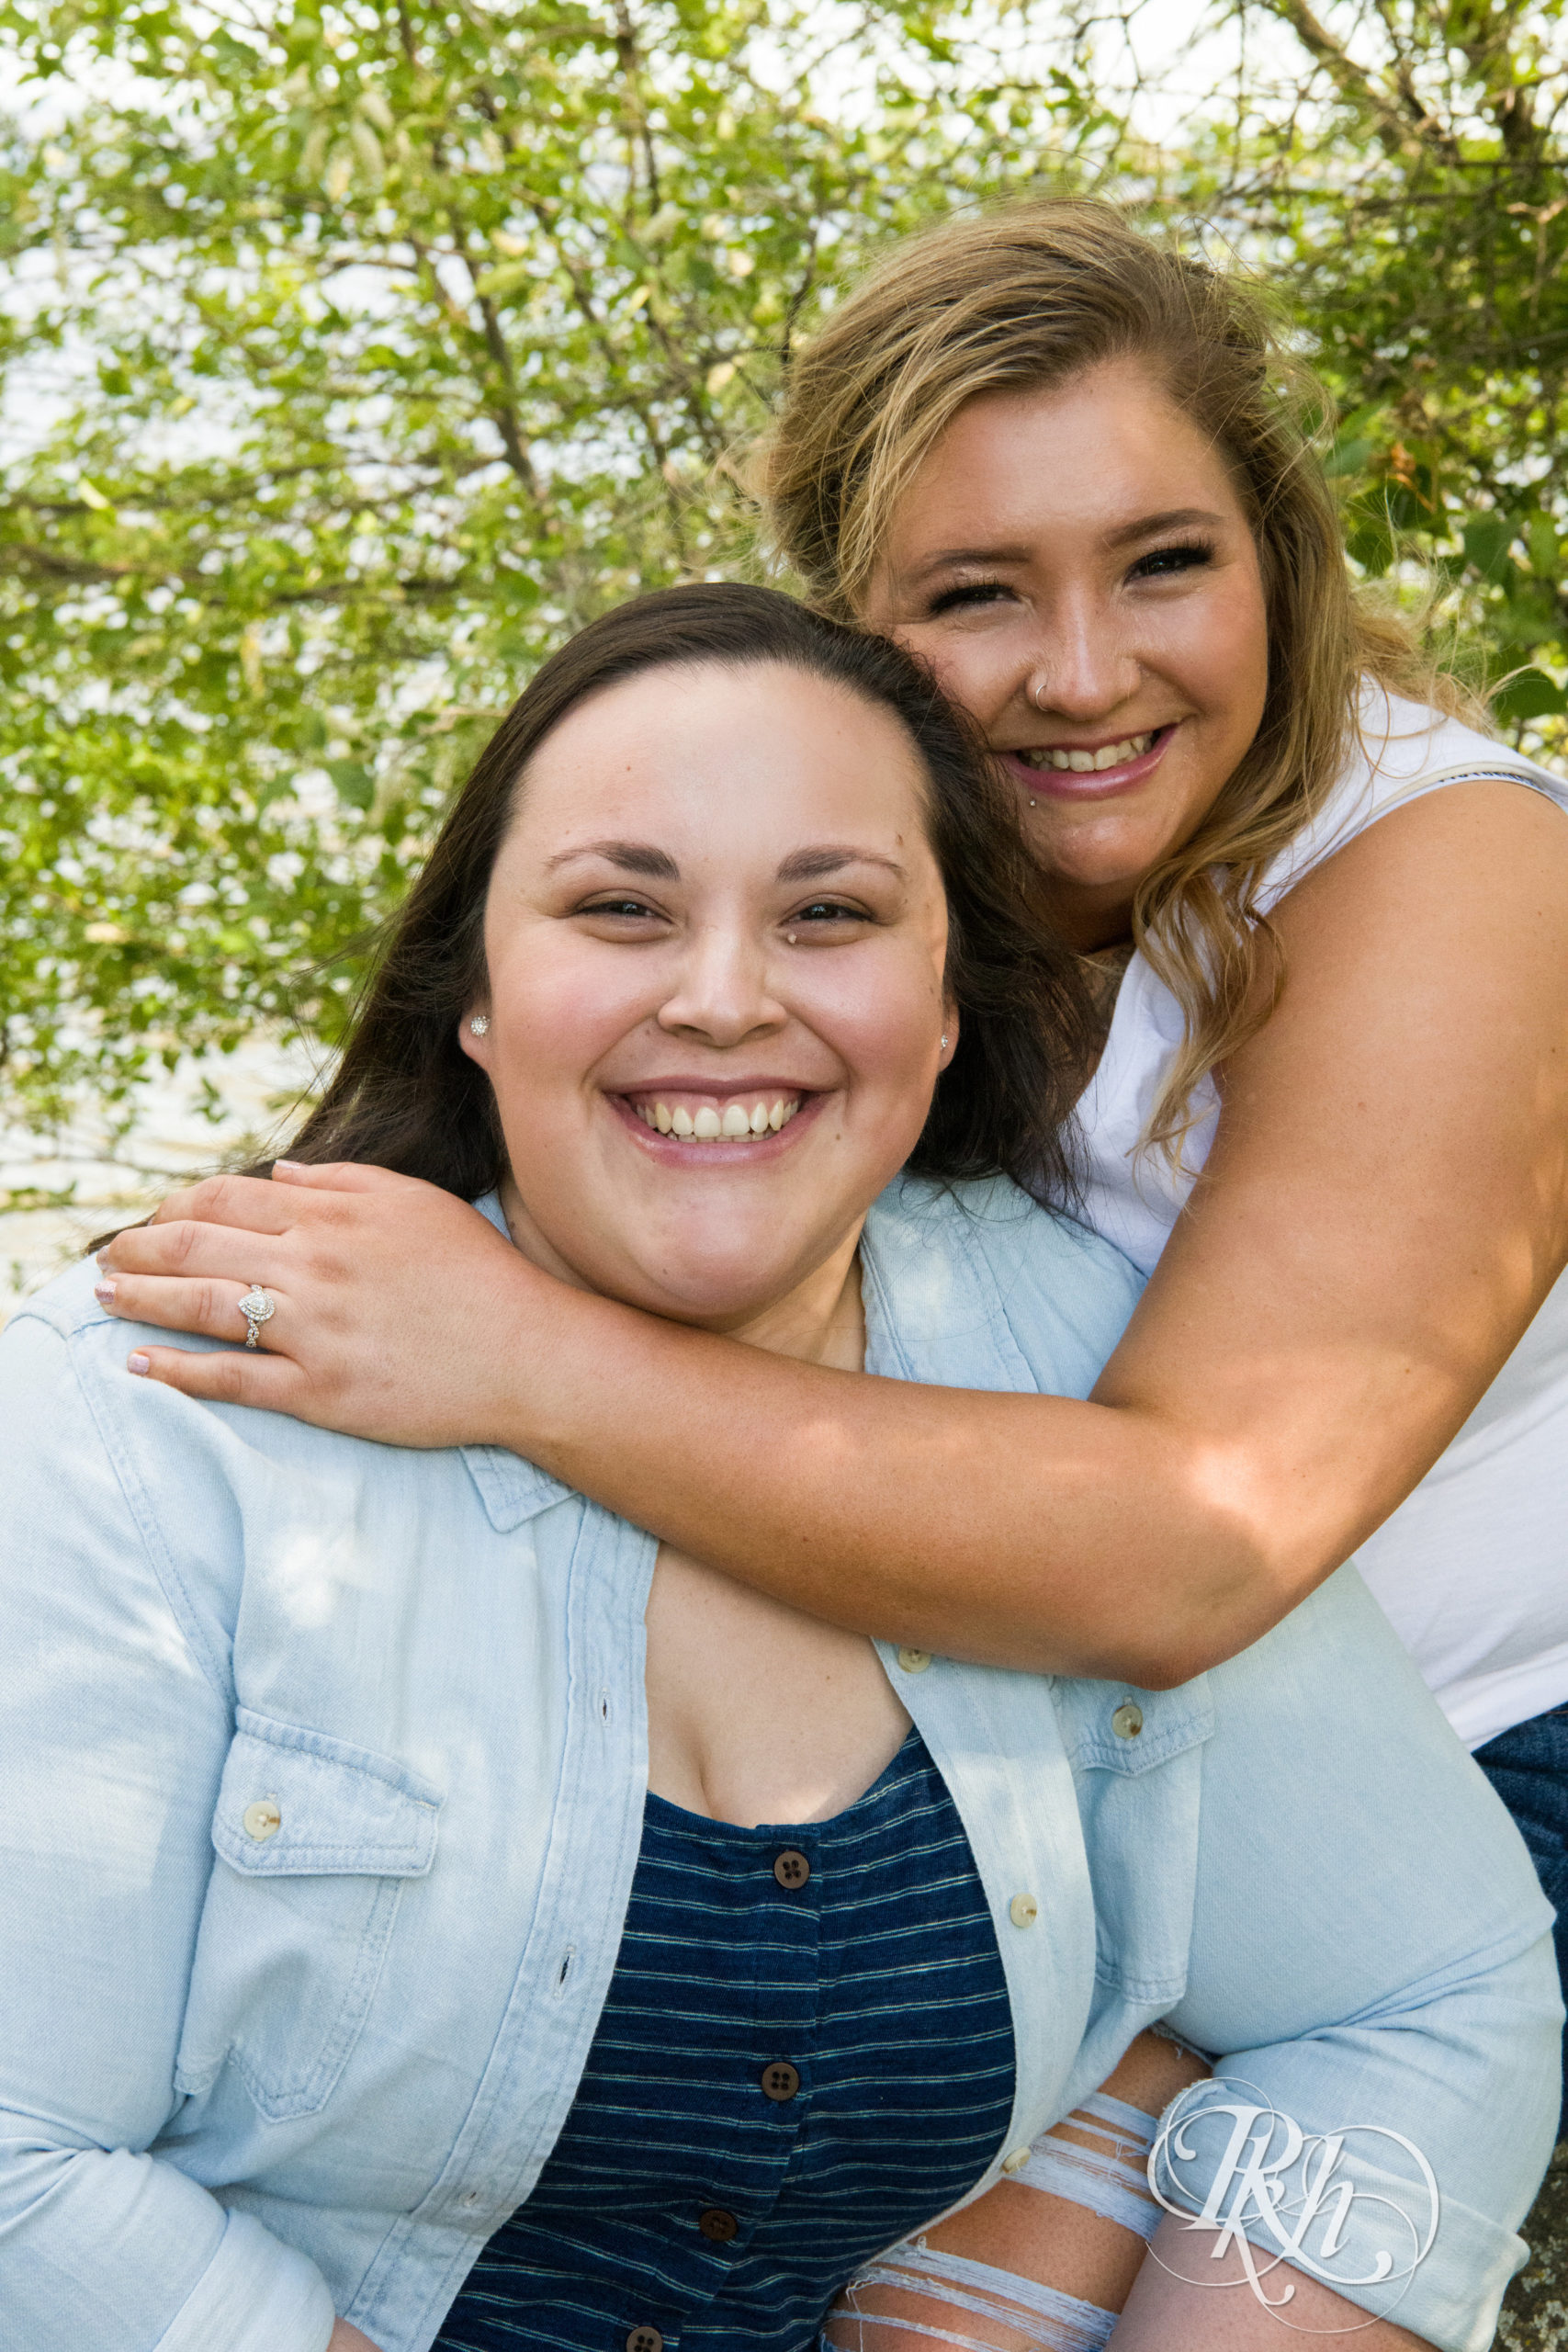 Lesbian couple smiles during engagement session in Duluth, Minnesota.